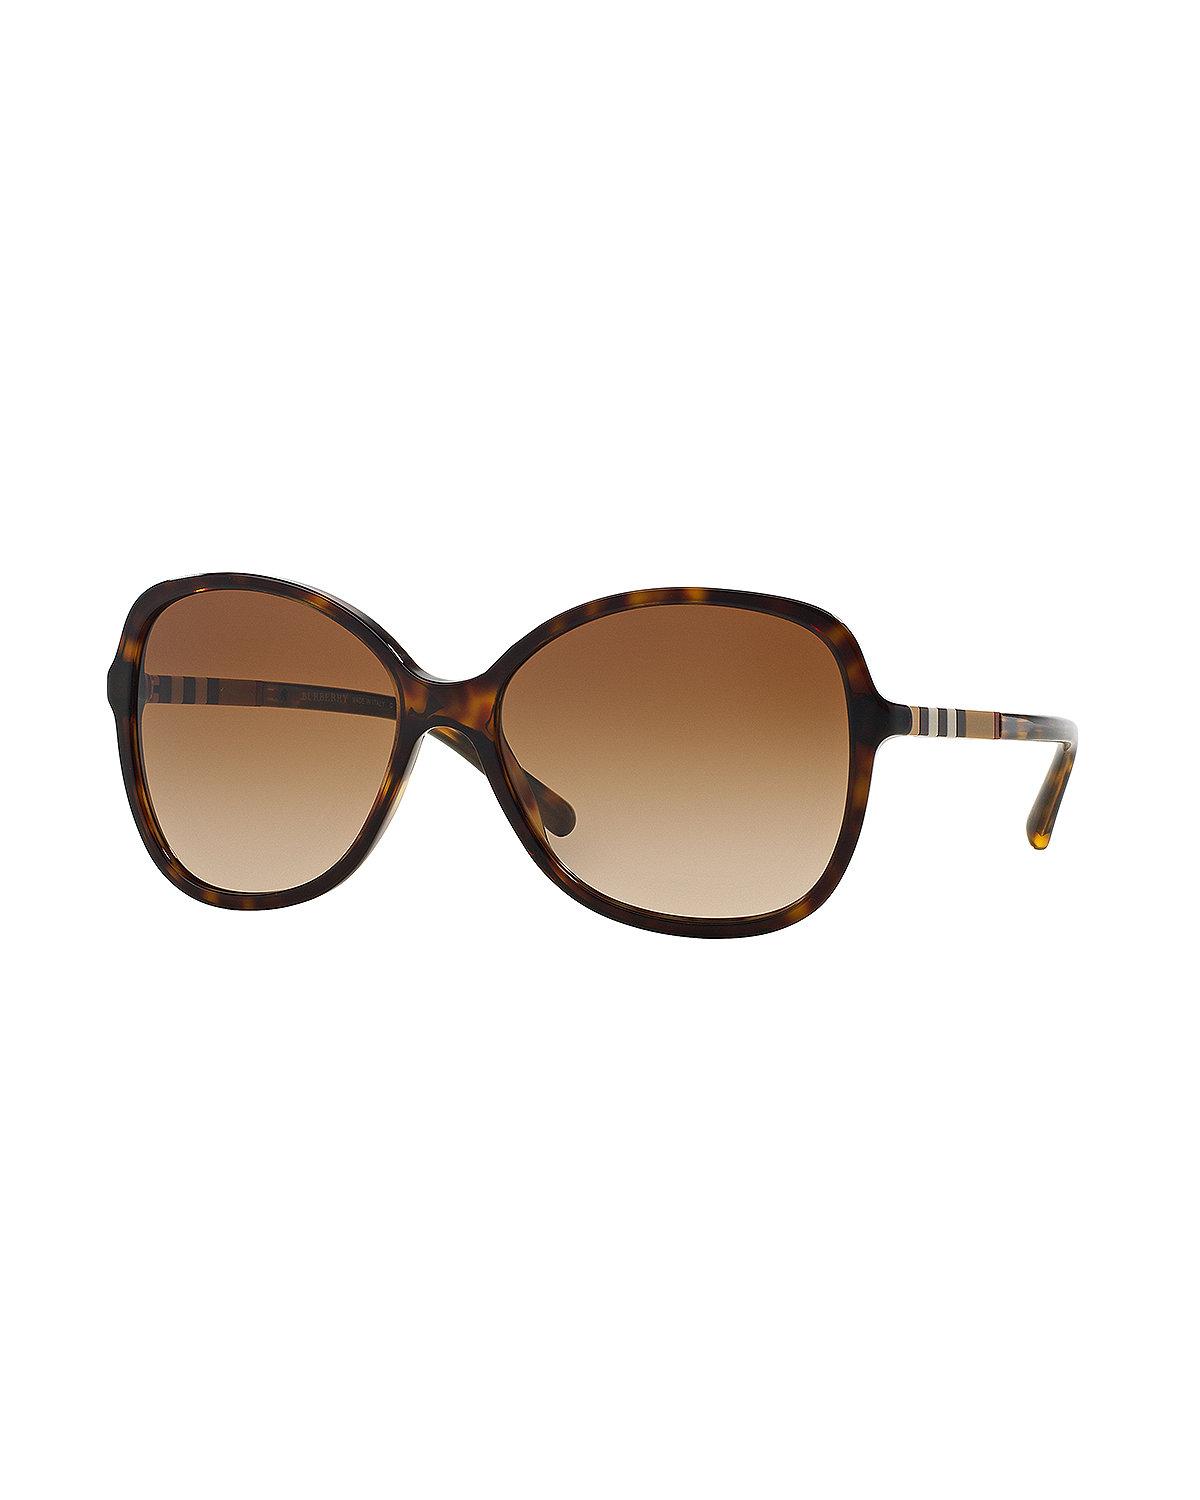 Burberry Oversize Check-temple Square Sunglasses in Brown - Lyst